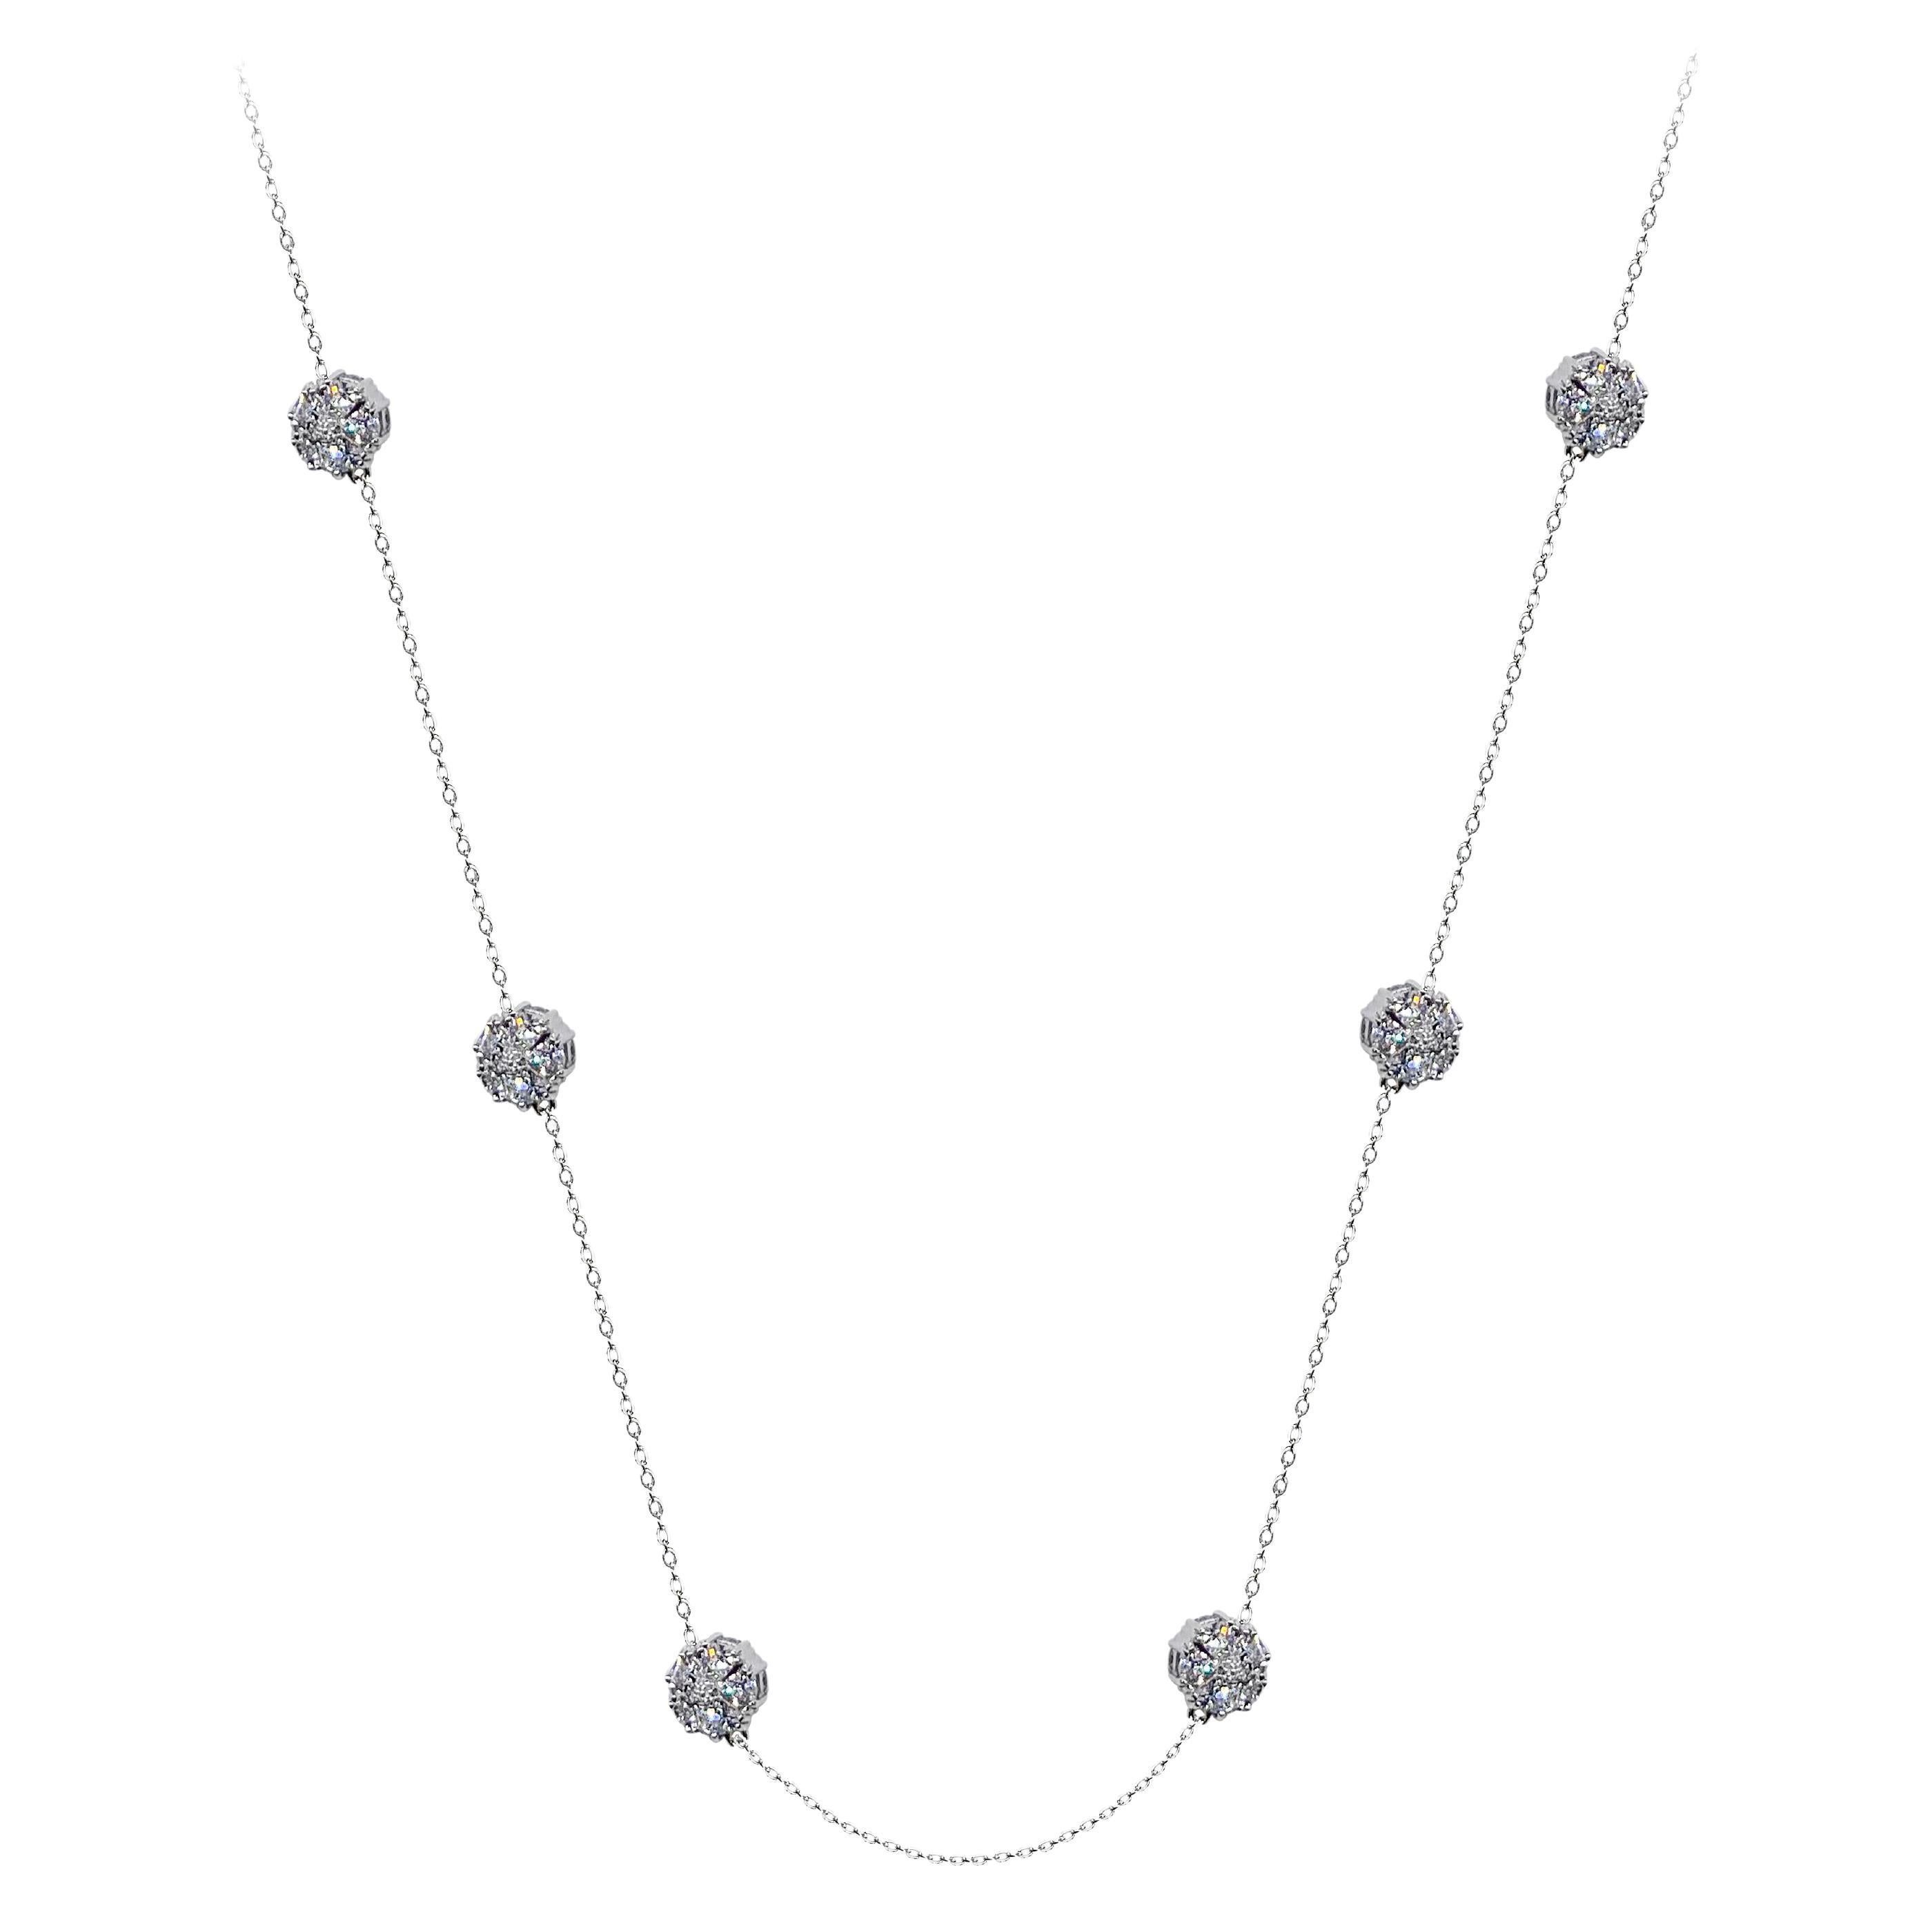 Medium Doublesided Blossom Chain Necklace